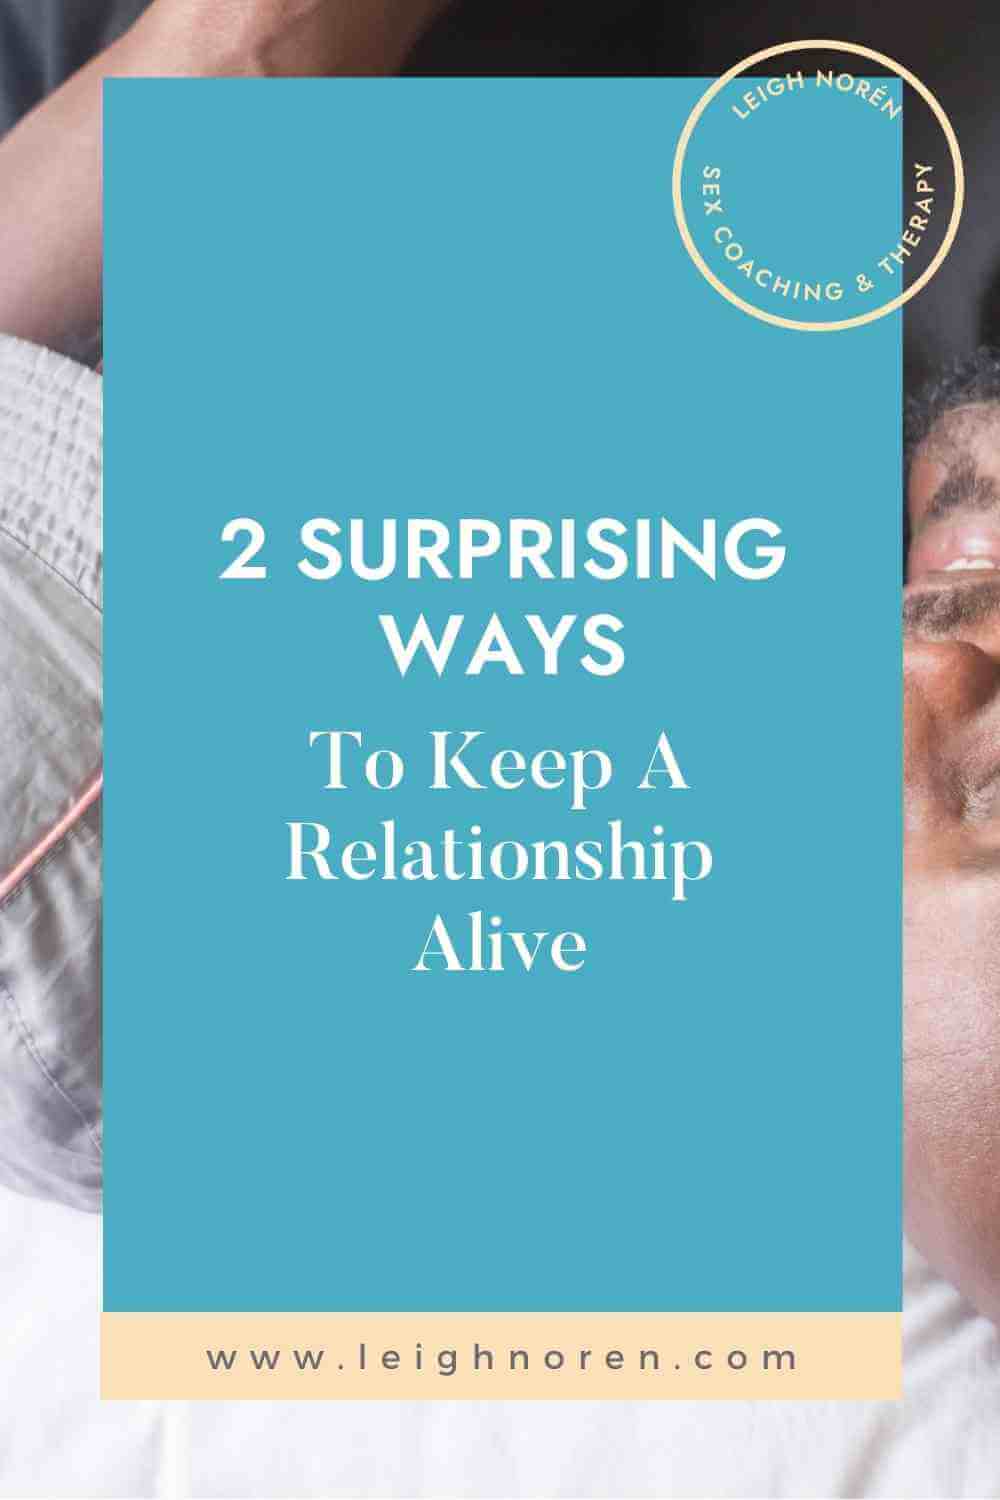 2 Surprising Ways To Keep A Relationship Alive